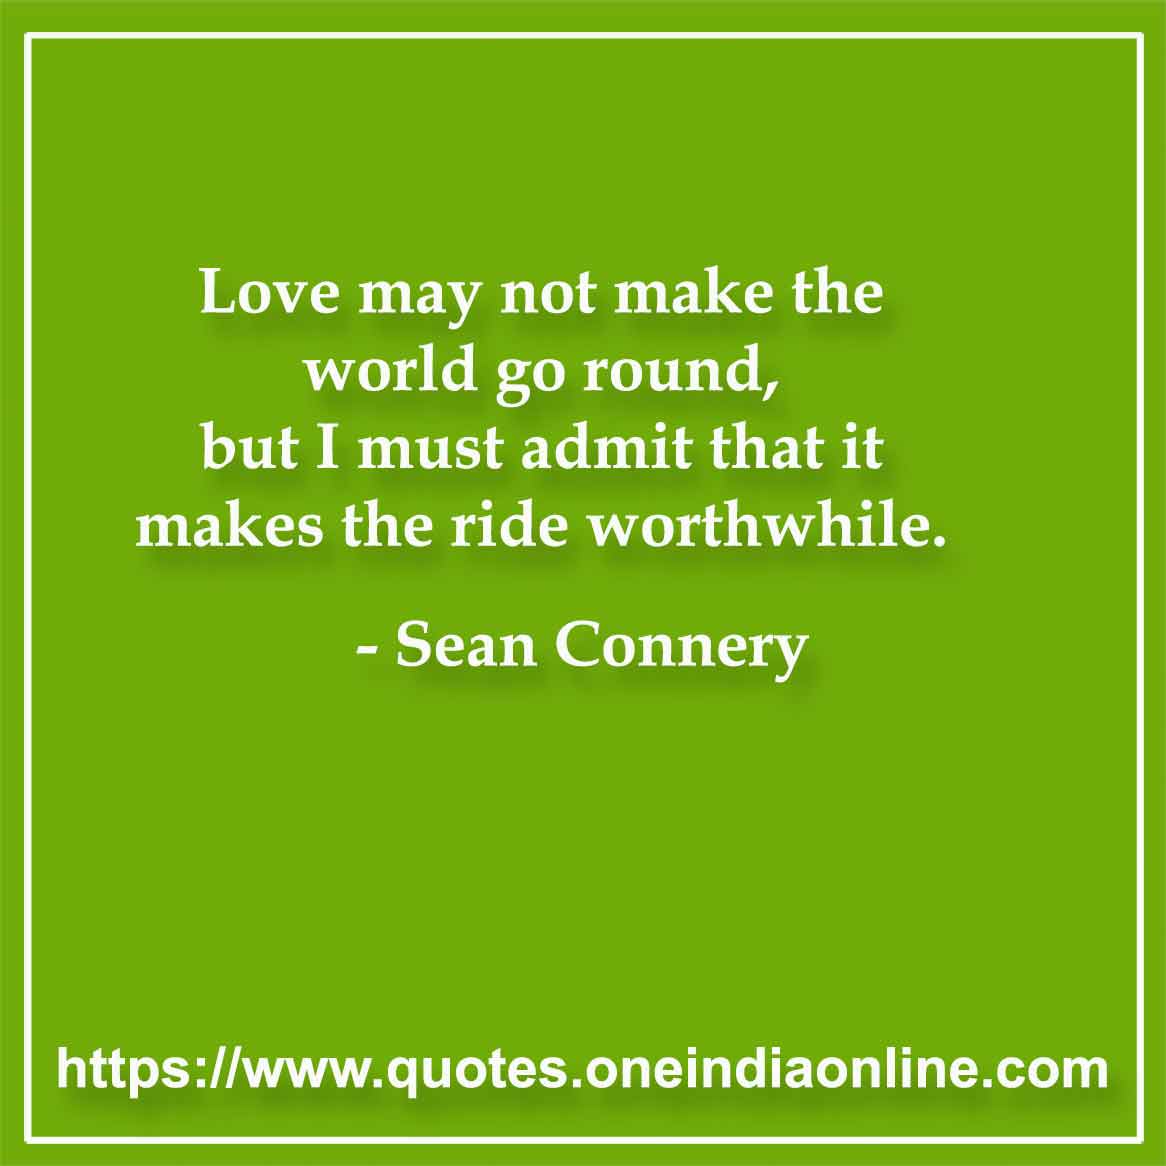 Love may not make the world go round, but I must admit that it makes the ride worthwhile.

-  Sean Connery